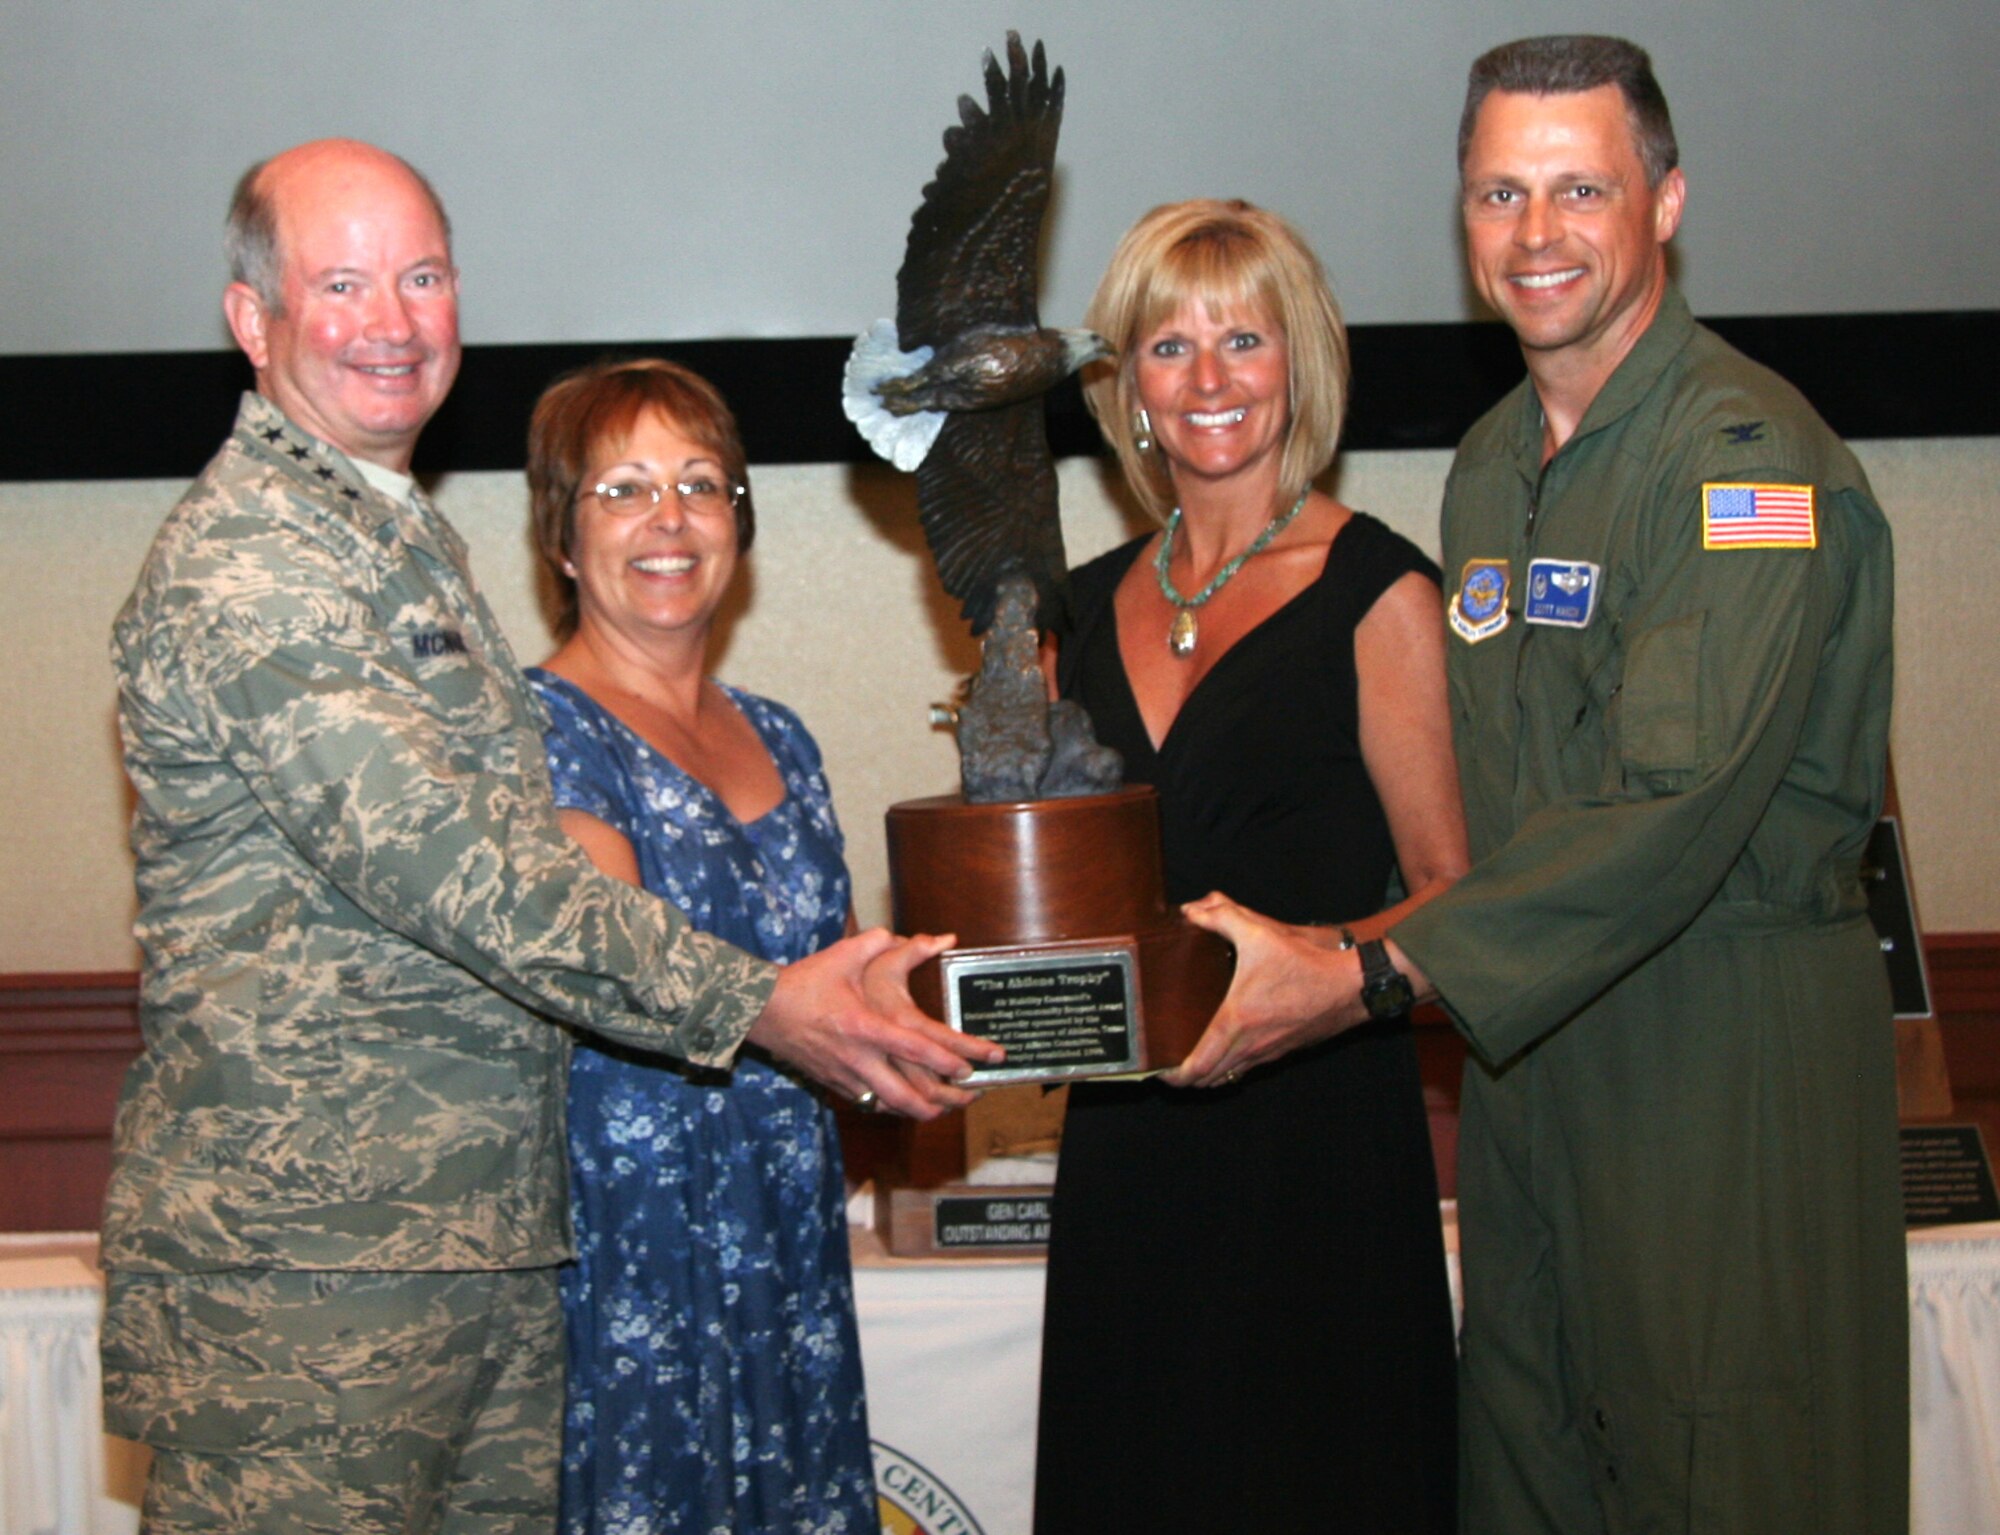 FAIRCHILD AIR FORCE BASE, Wash. – Gen. Duncan J. McNabb, Air Mobility Command commander, and Col. Scott Hanson, 92nd Air Refueling Wing commander, and their wives, Linda and Rhonda respectively, pose with the Abilene Trophy.  During Phoenix Rally at MacDill AFB, Fla., it was announced the Spokane Community is the 2006 Abilene Trophy recipient.  The trophy recognizes the community that provides the finest support to an AMC installation. The award is presented annually, providing recognition for activities conducted between January and December of the preceding year.   